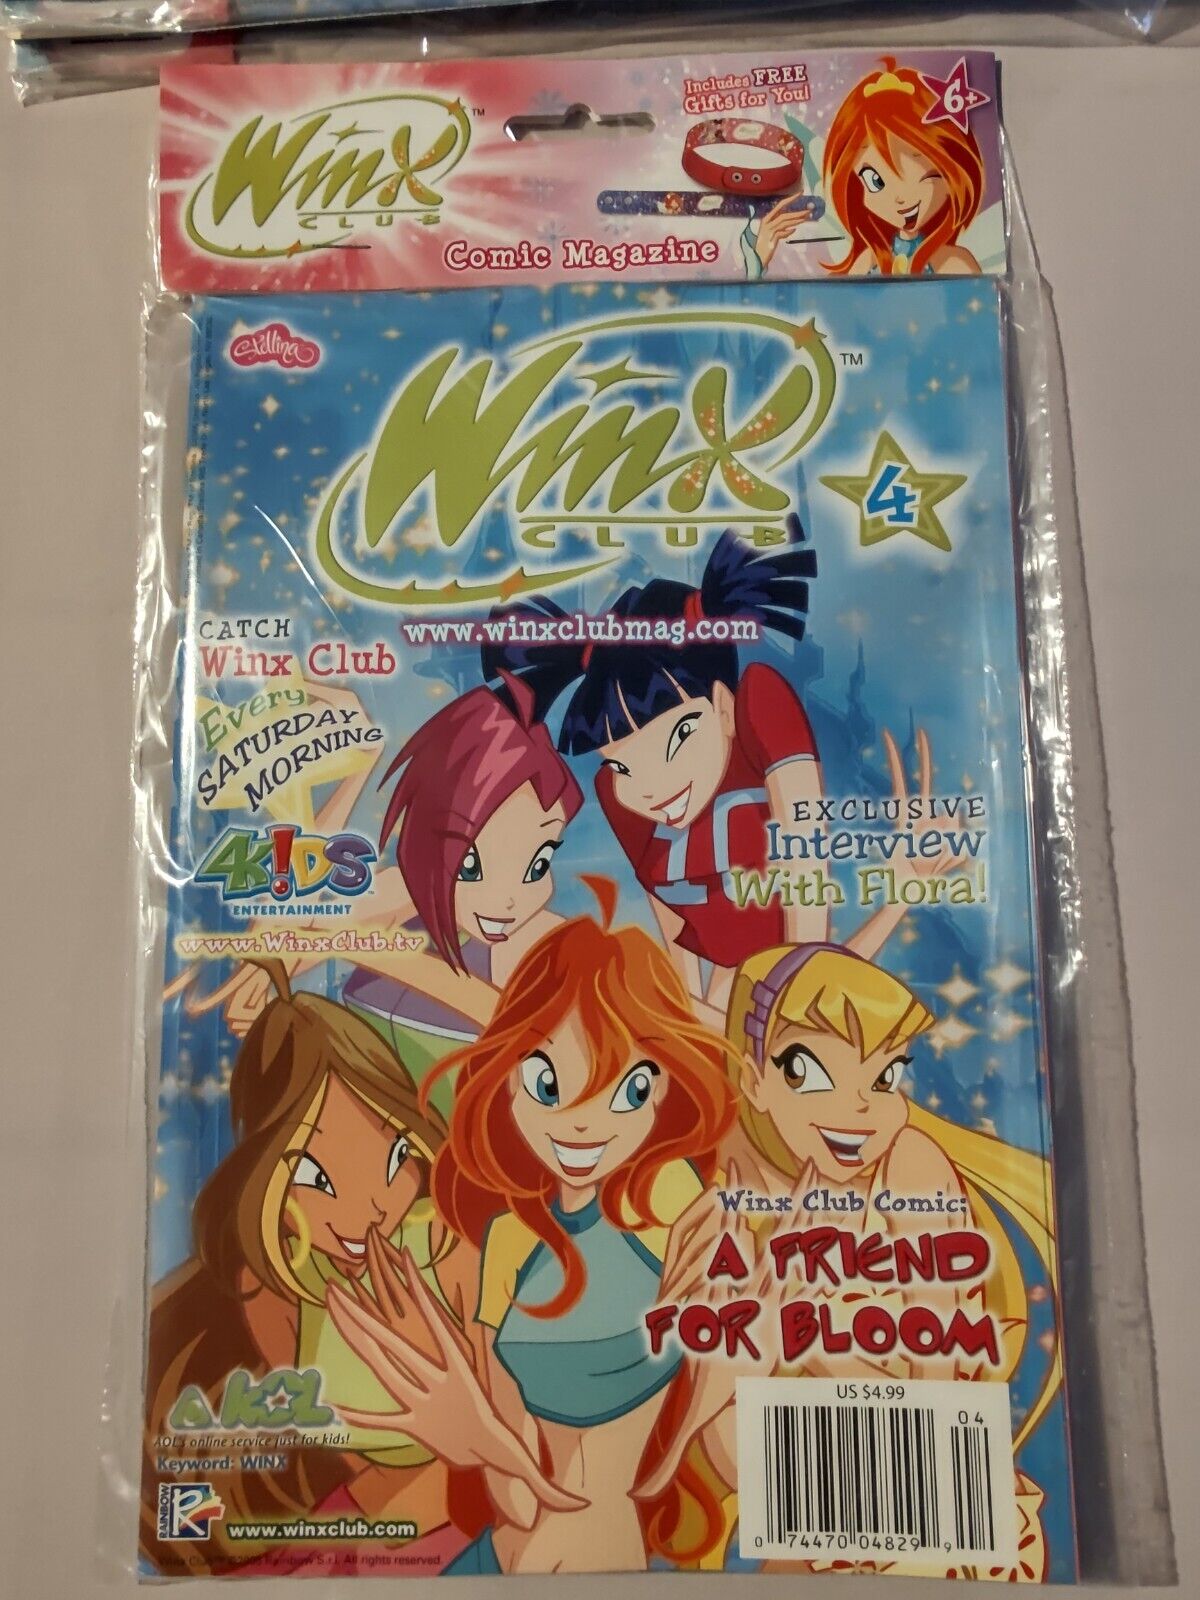 RARE 2005 WINX CLUB COMIC MAGAZINE #4 SEALED NOS WITH COLLECTIBLE BRACELETS 